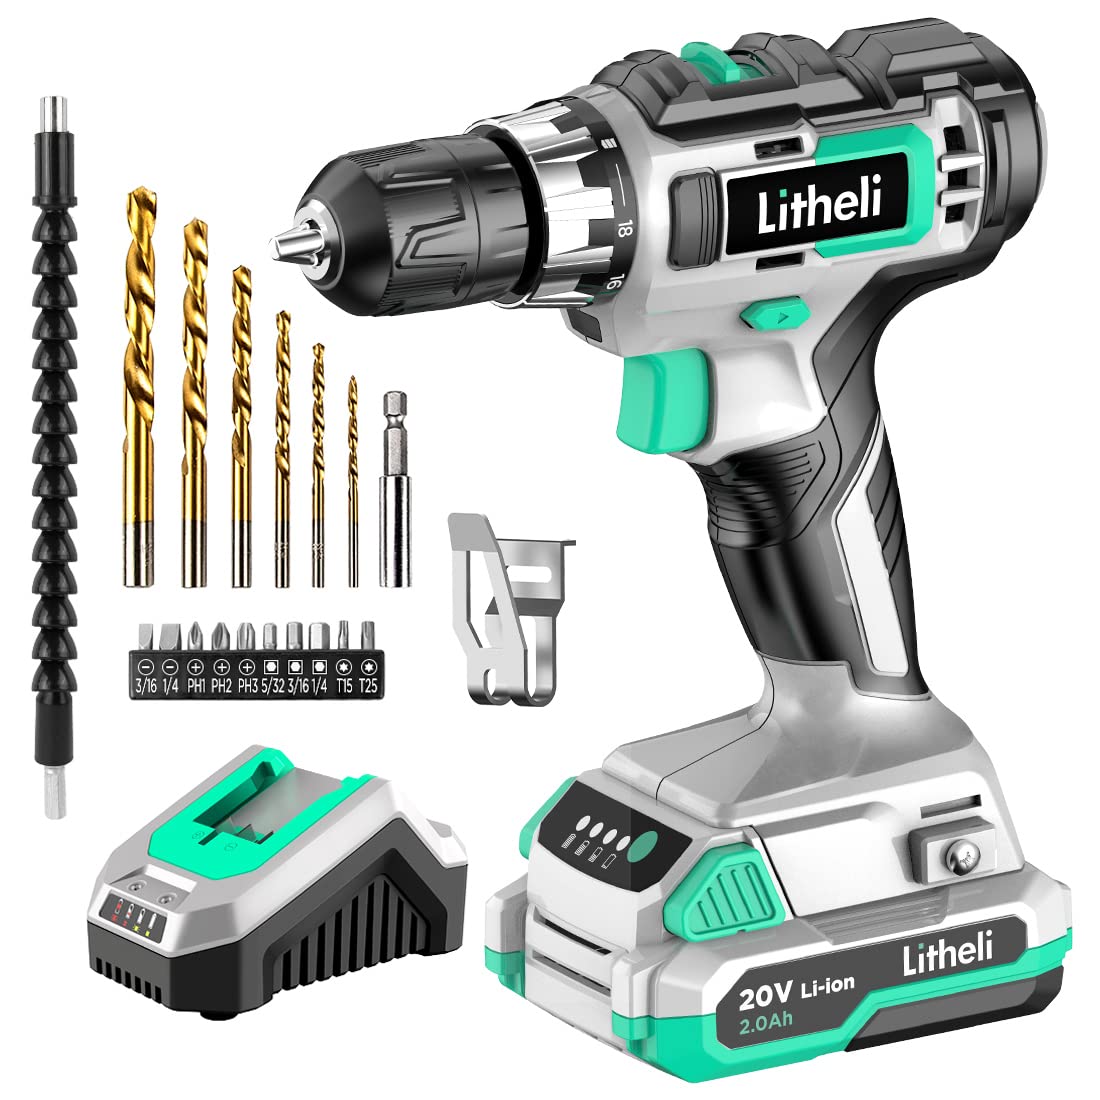 Litheli Cordless Drill Set, 20V Max Power Drill Cordless Set, 3/8” Keyless Chuck, 18+1 Torque Settings, Variable Speed, w/ 2.0 Ah Battery and 1 Hour